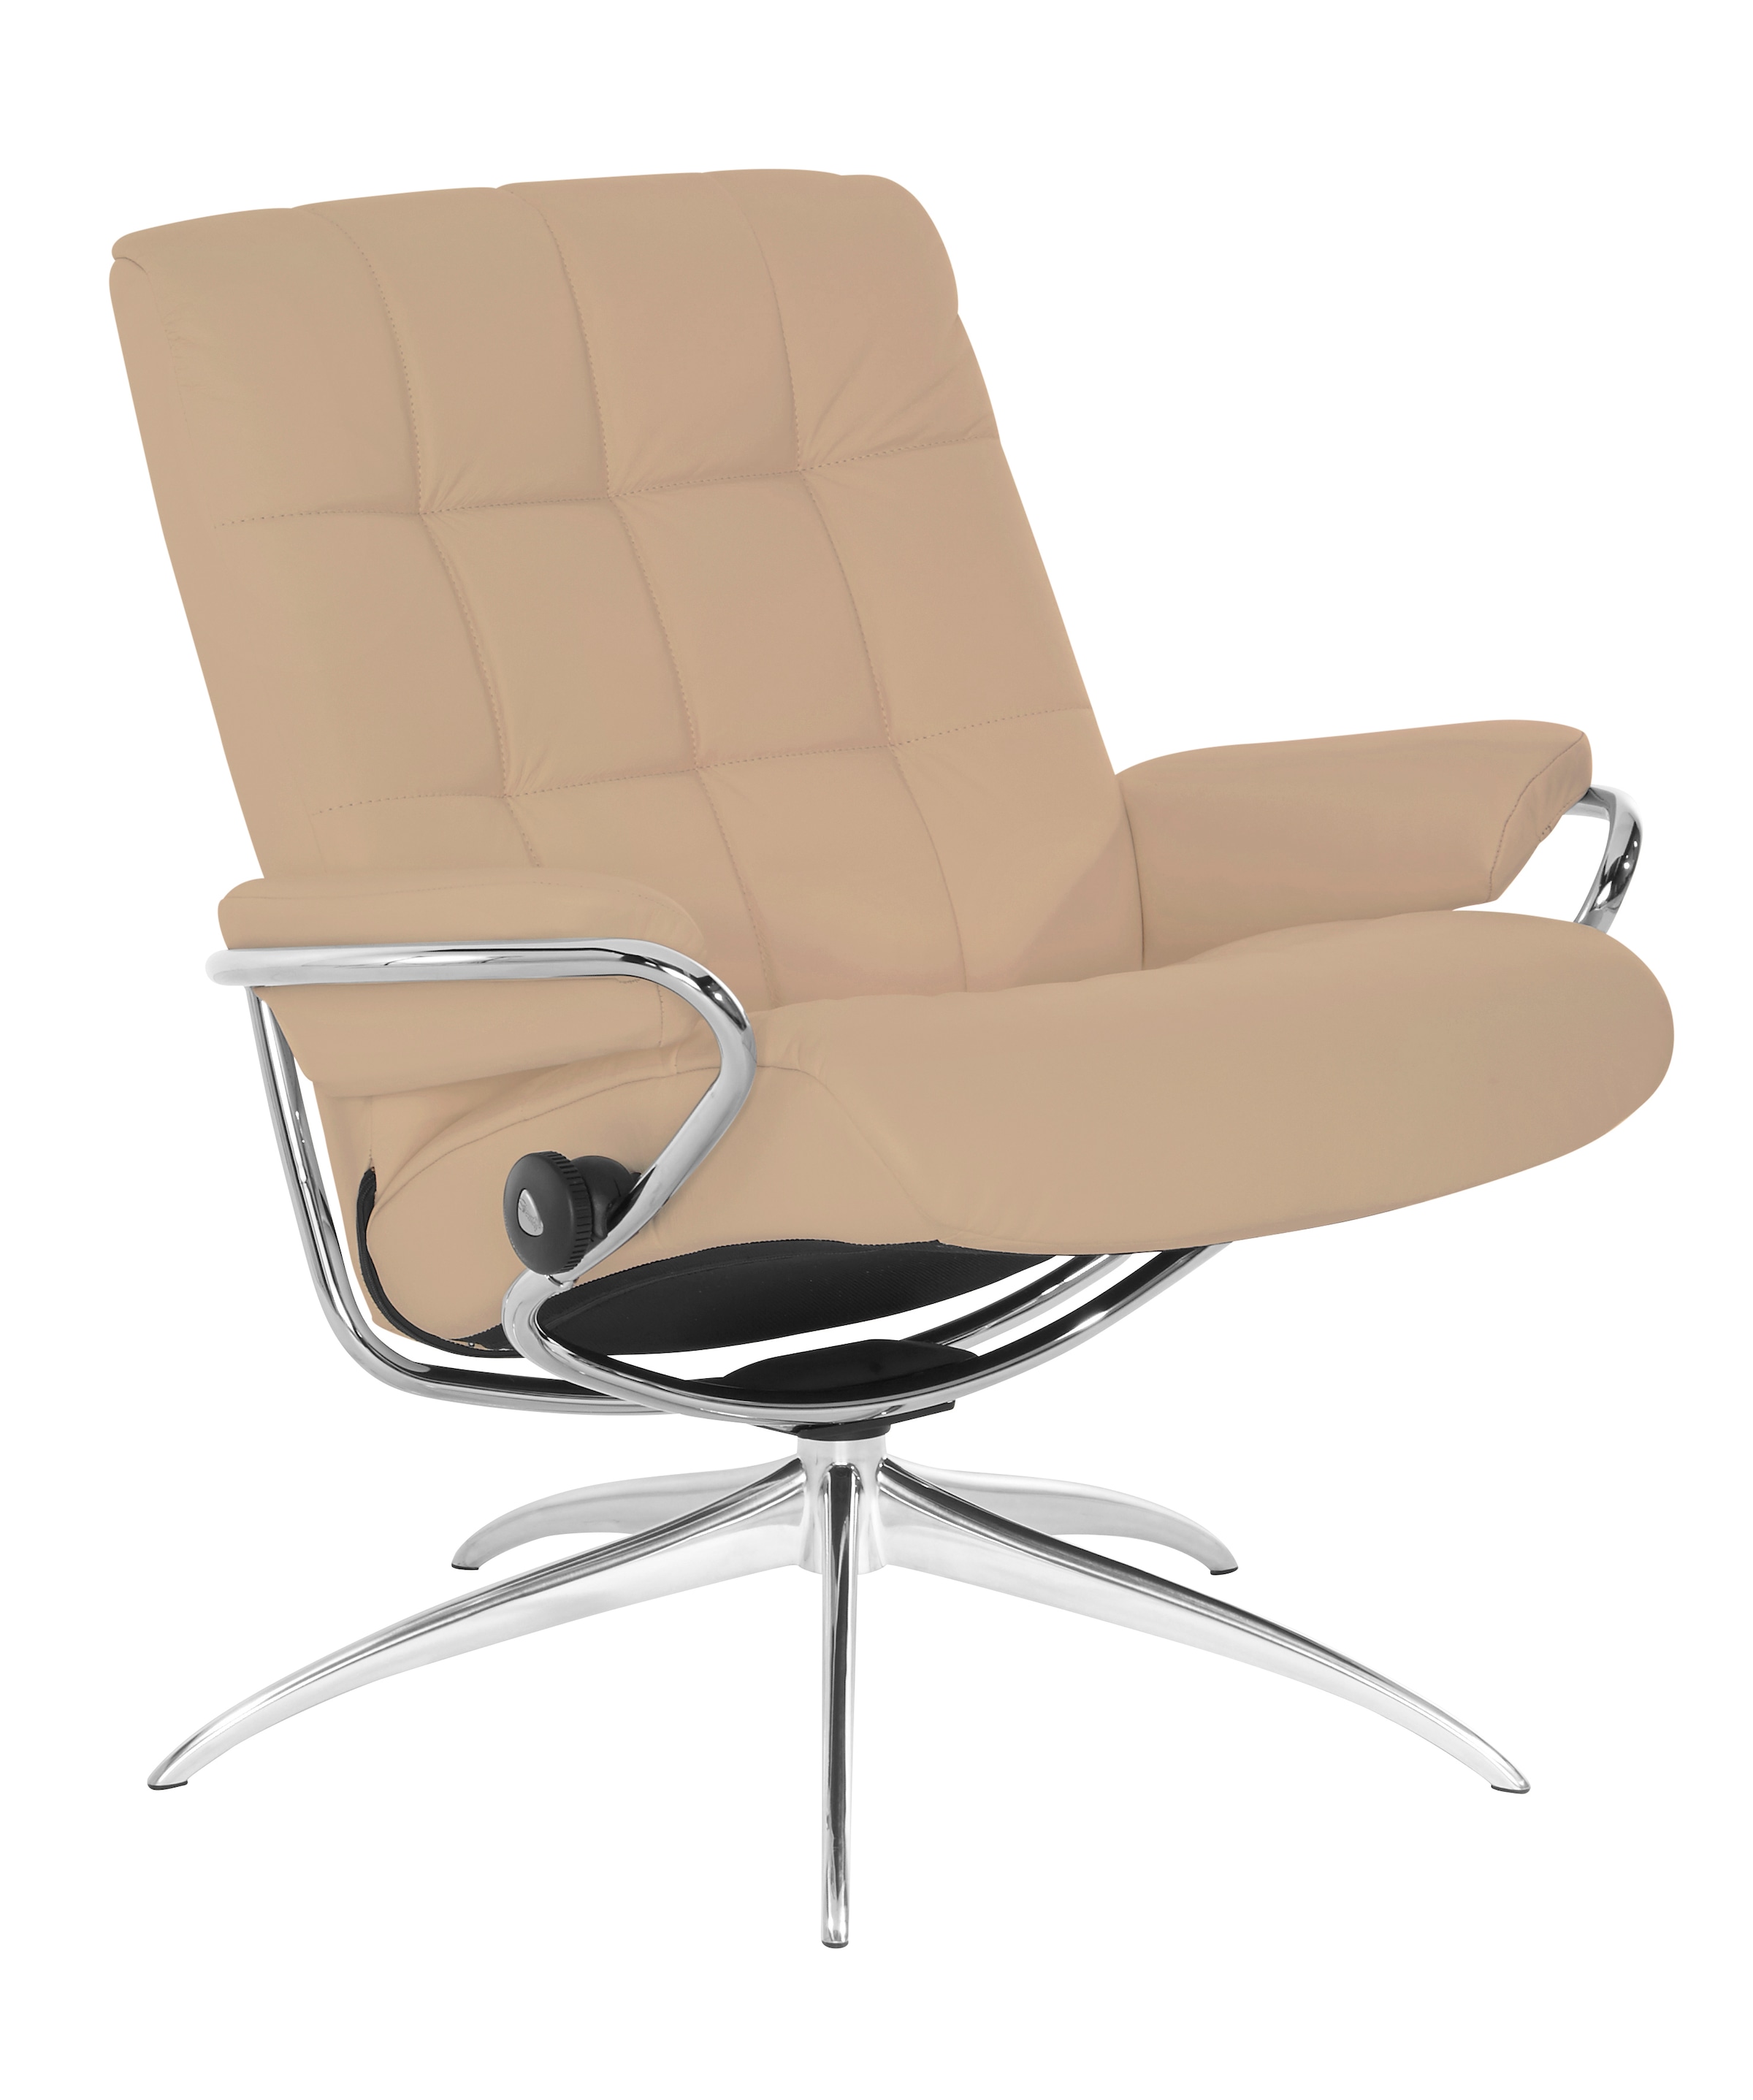 Stressless® Relaxsessel »London«, Low Back, mit Chrom Star OTTO kaufen bei Base, Gestell